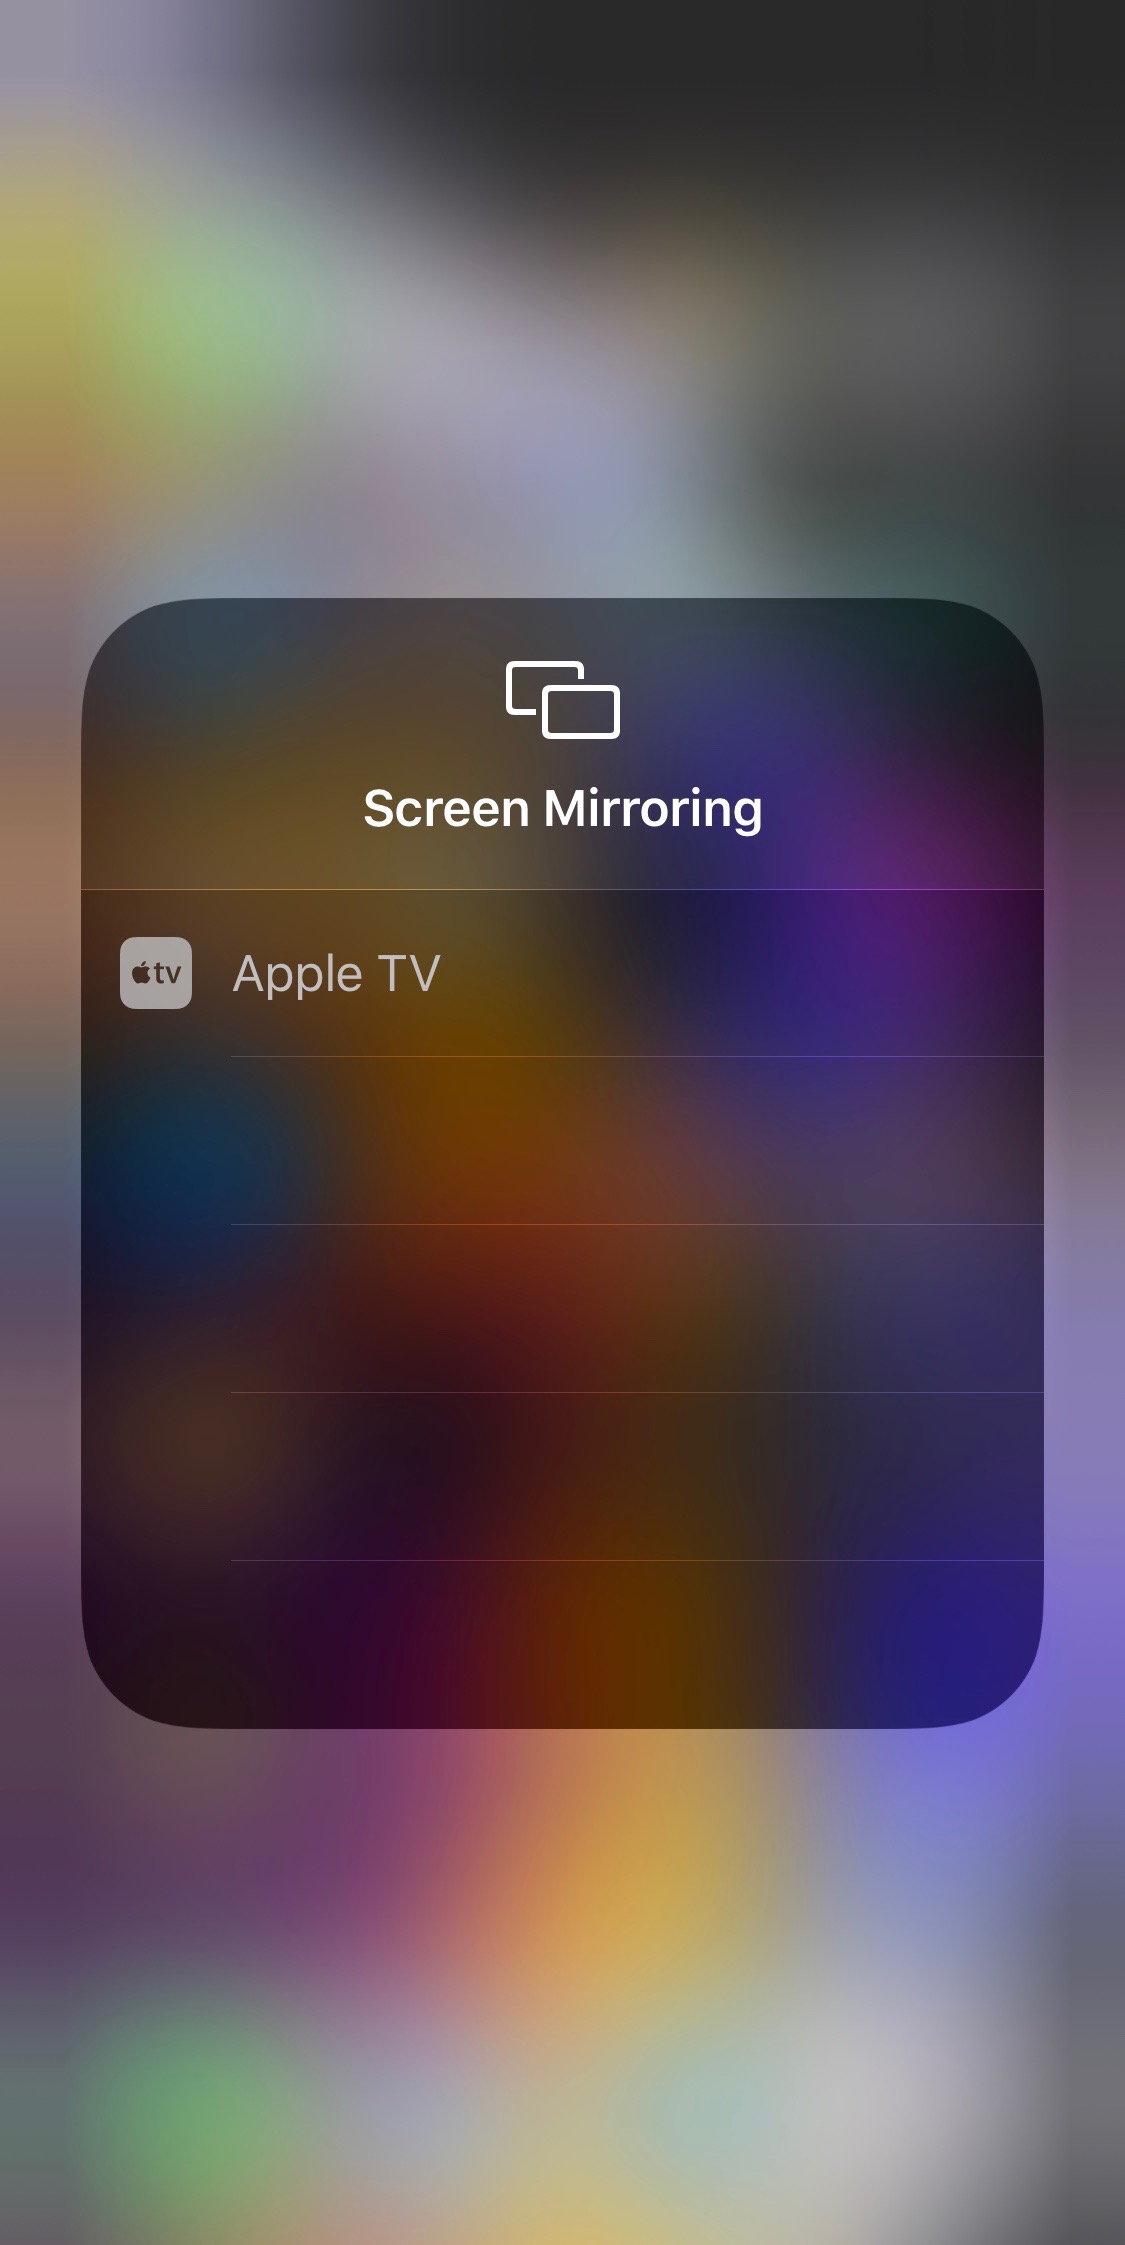 We Cannot Turn Off Screen Mirroring On, How To Turn Off Screen Mirroring On Iphone